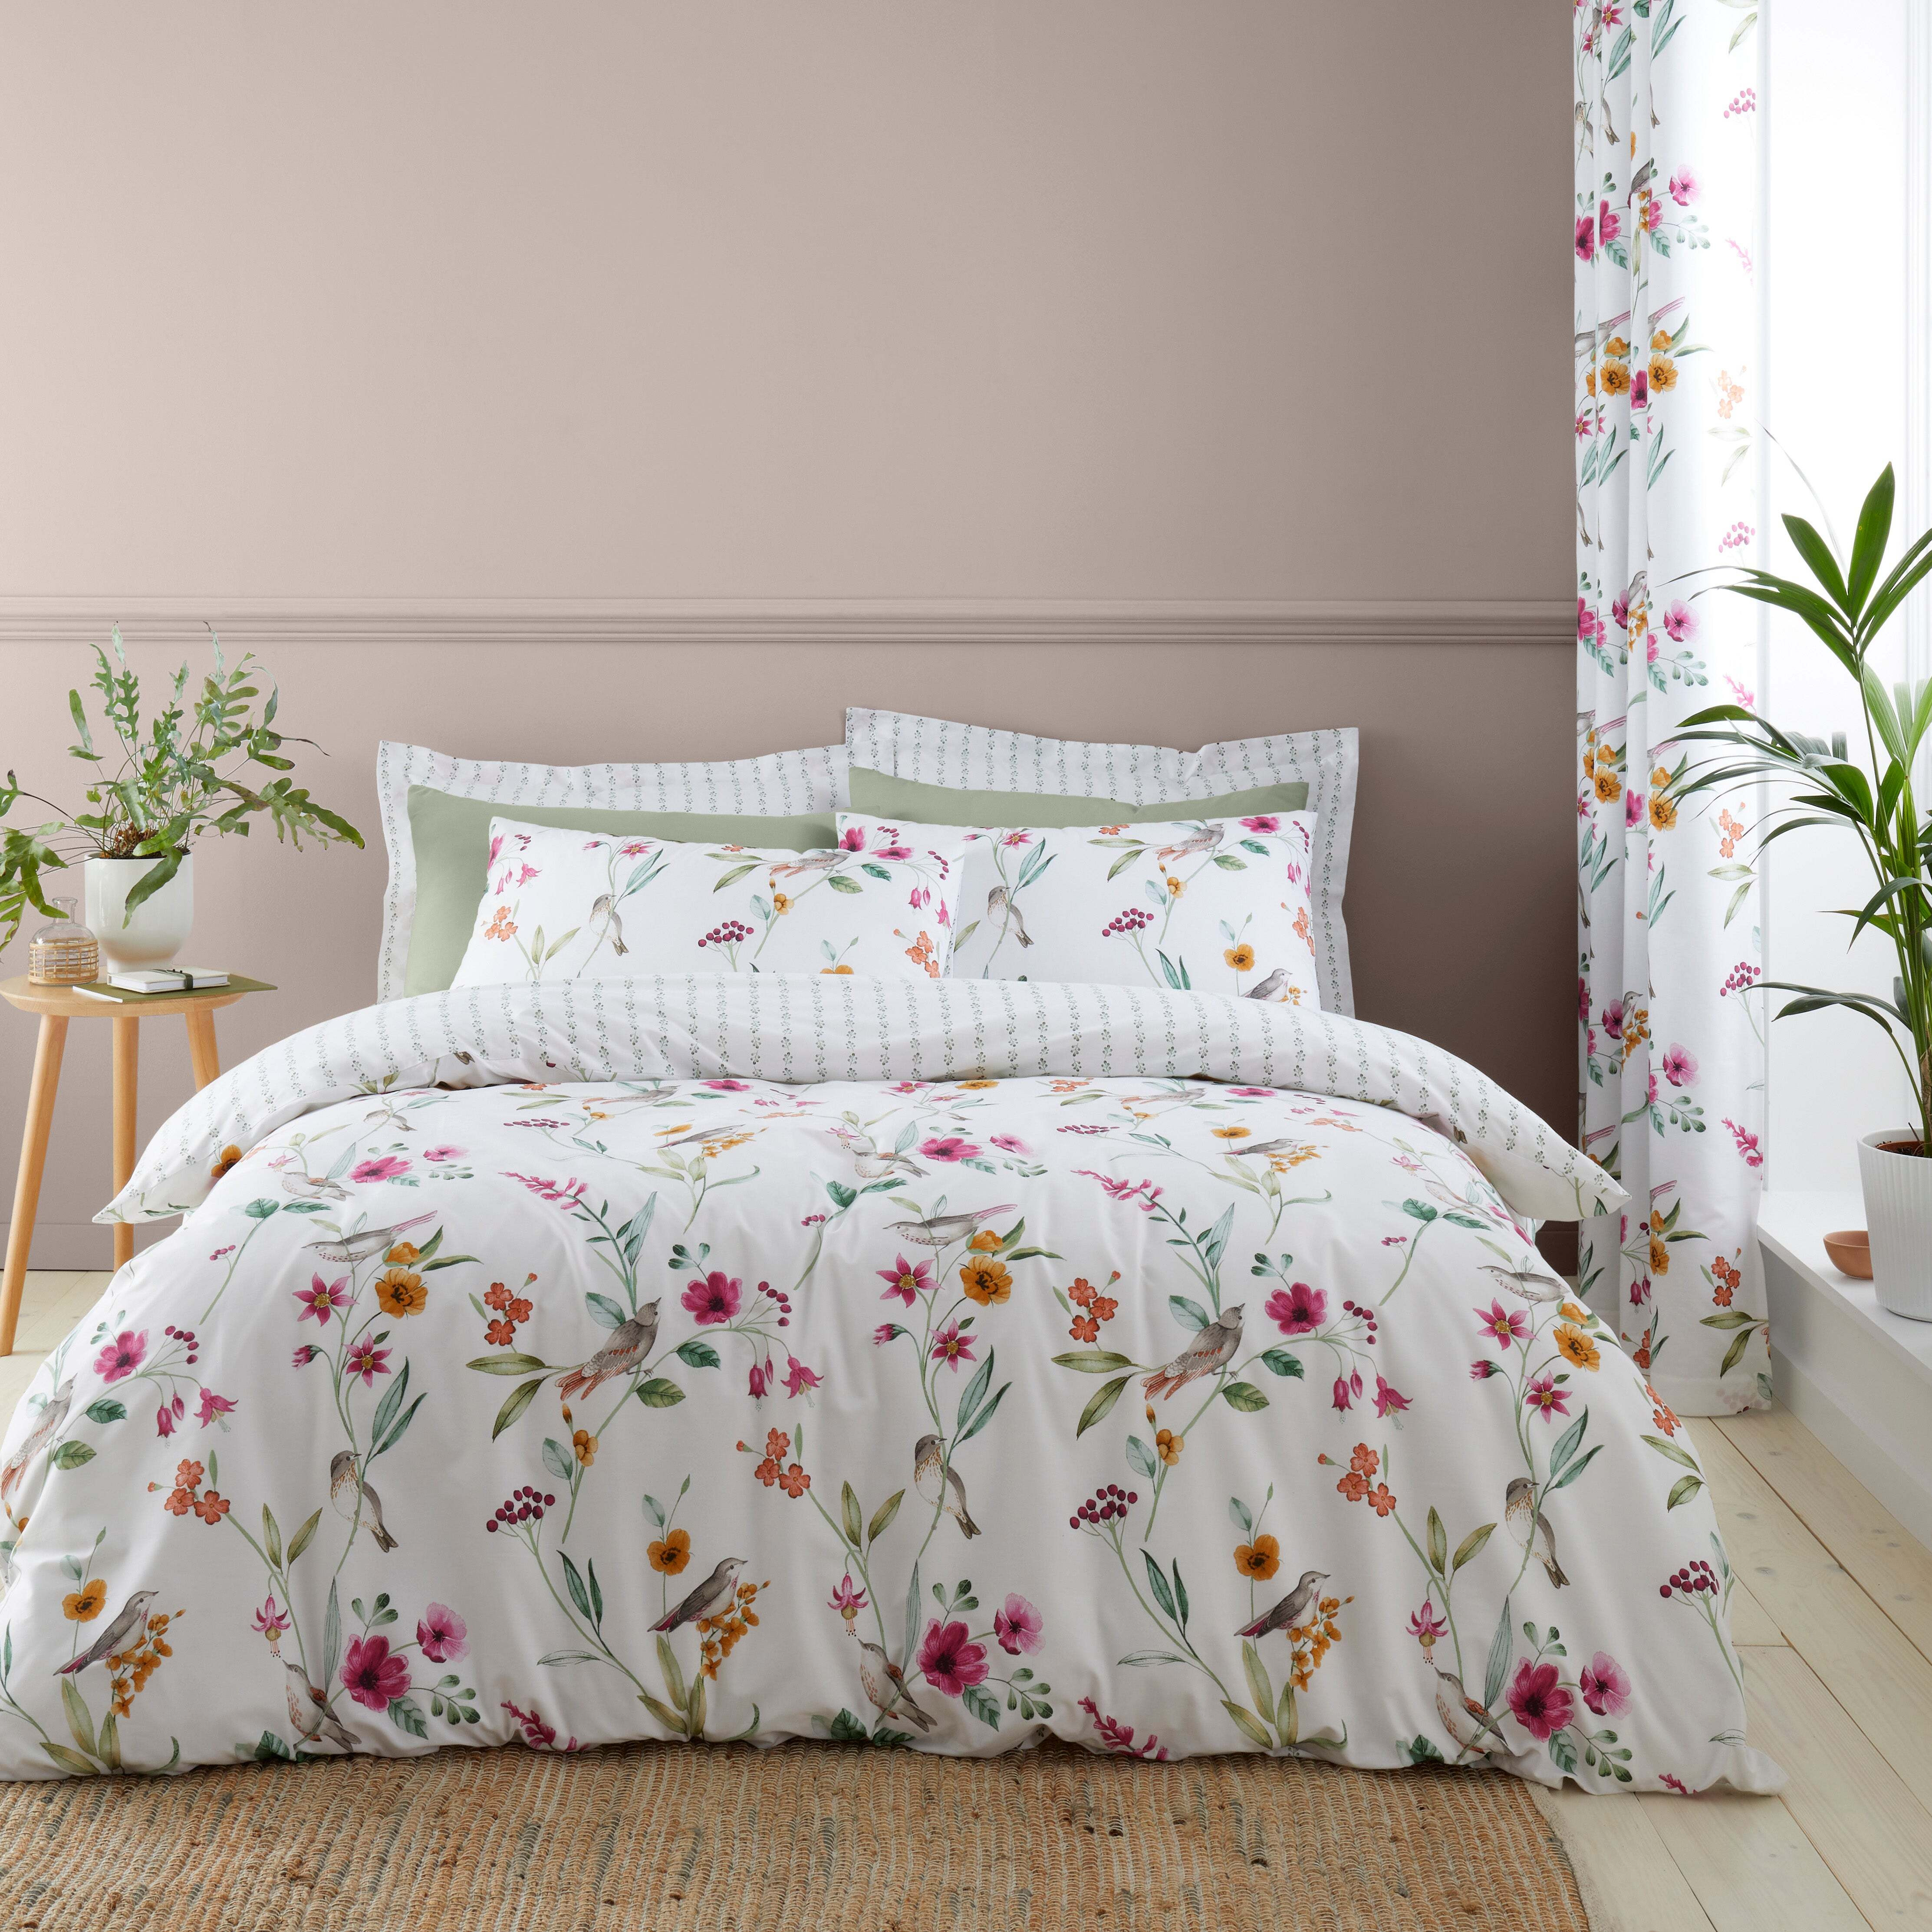 Country Bird Pink Duvet Cover and Pillowcase Set Pink/White